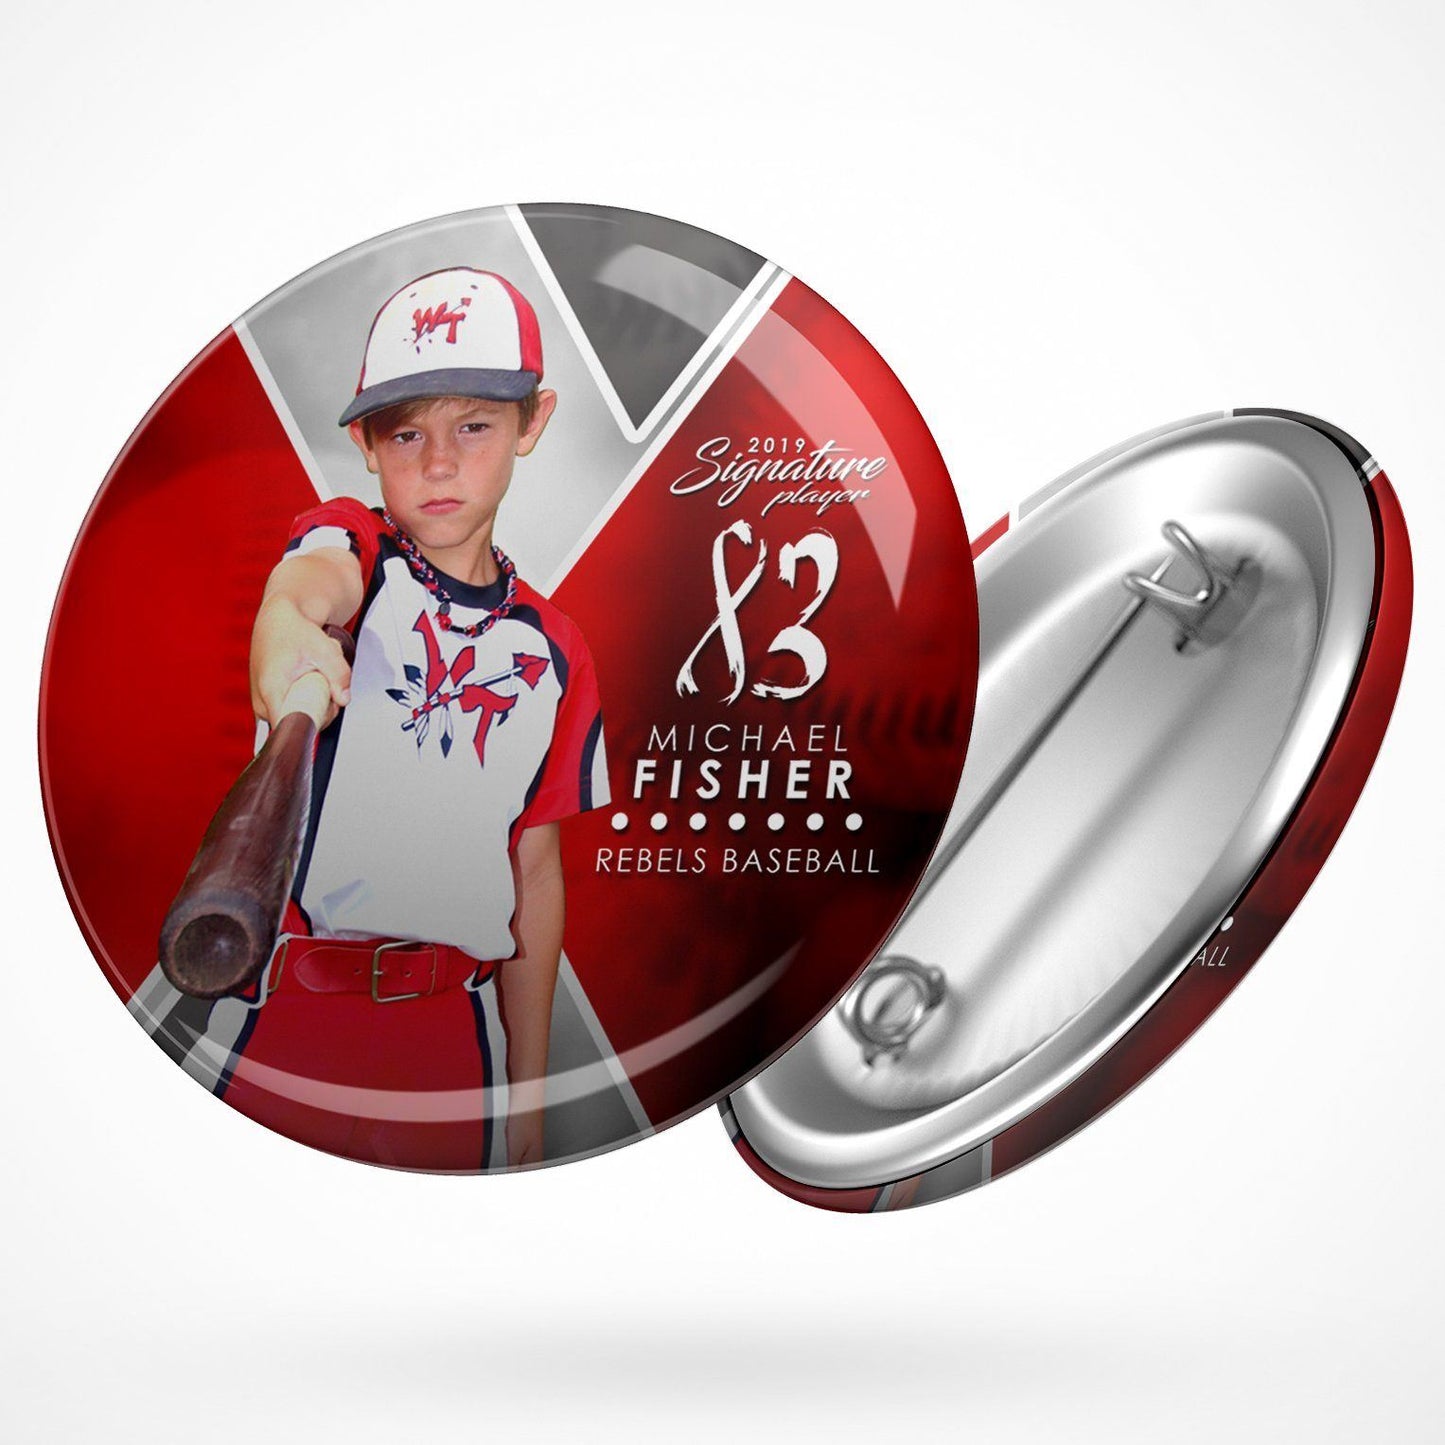 Signature Player - Baseball - V2 - Extraction Button Template-Photoshop Template - Photo Solutions